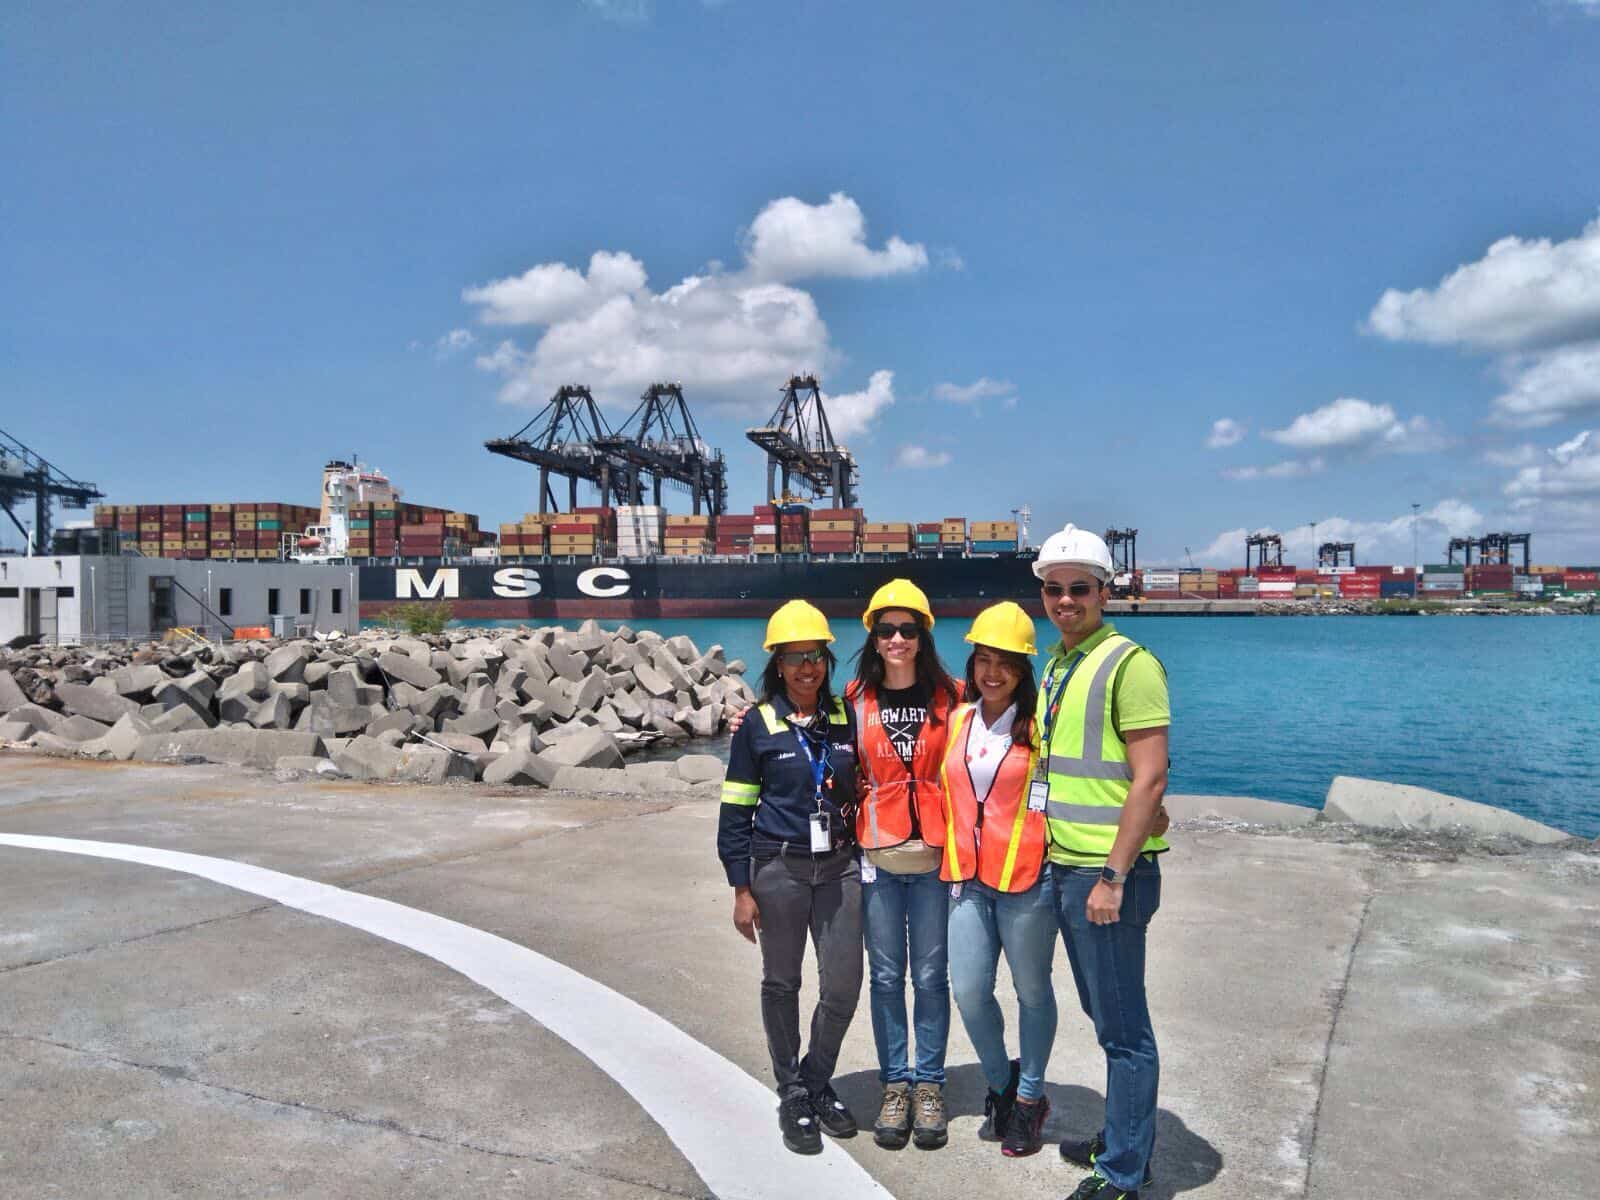 Julissa Moreta poses in a Tropical shipyard with her family. All wear reflective vests and hard hats.